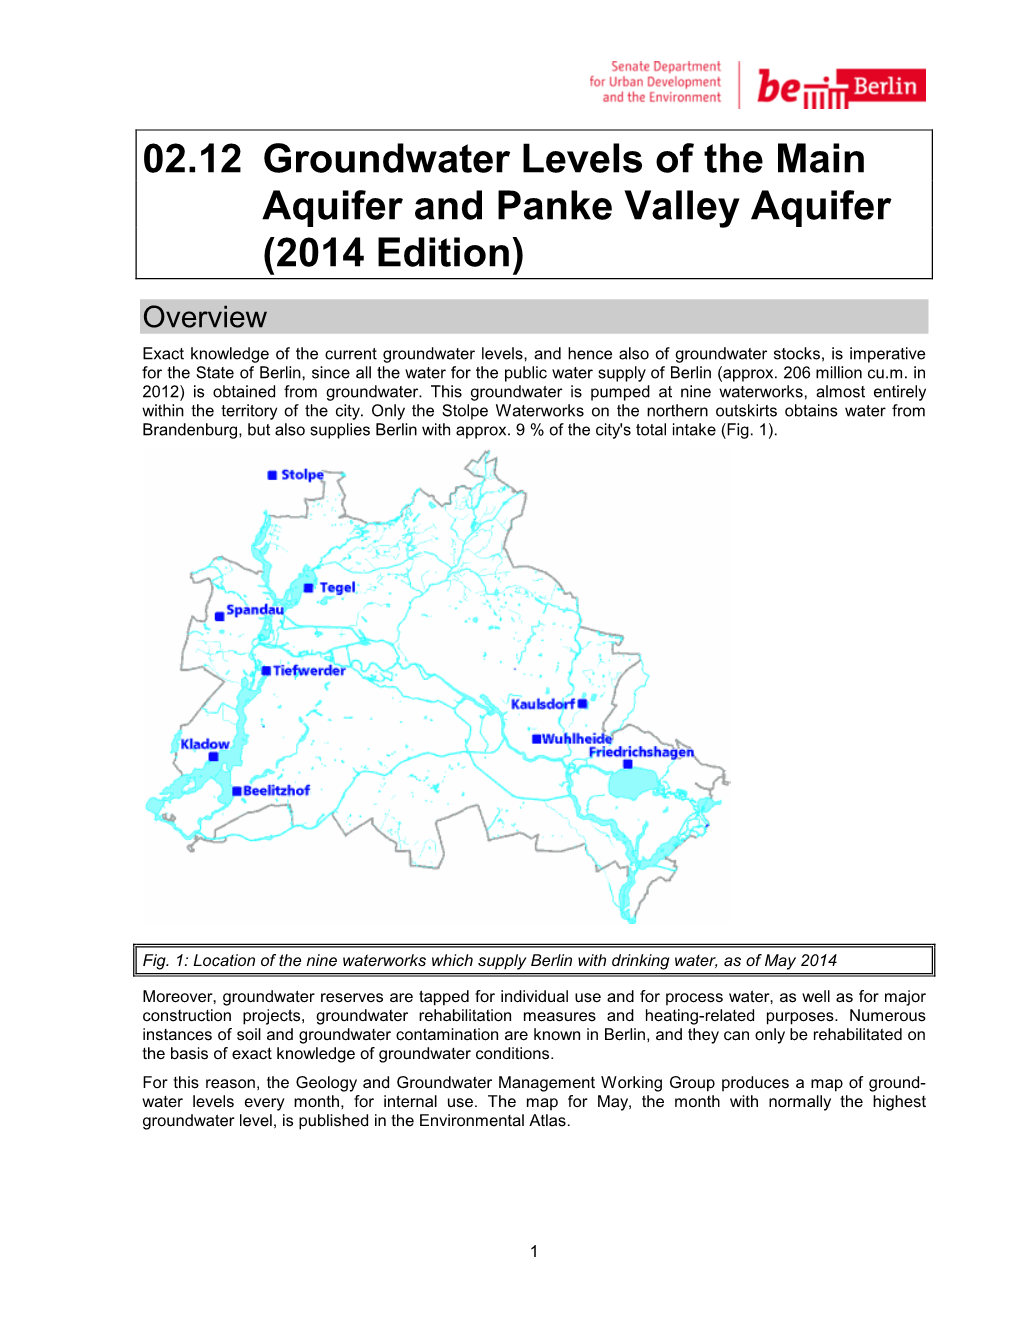 02.12 Groundwater Levels of the Main Aquifer and Panke Valley Aquifer